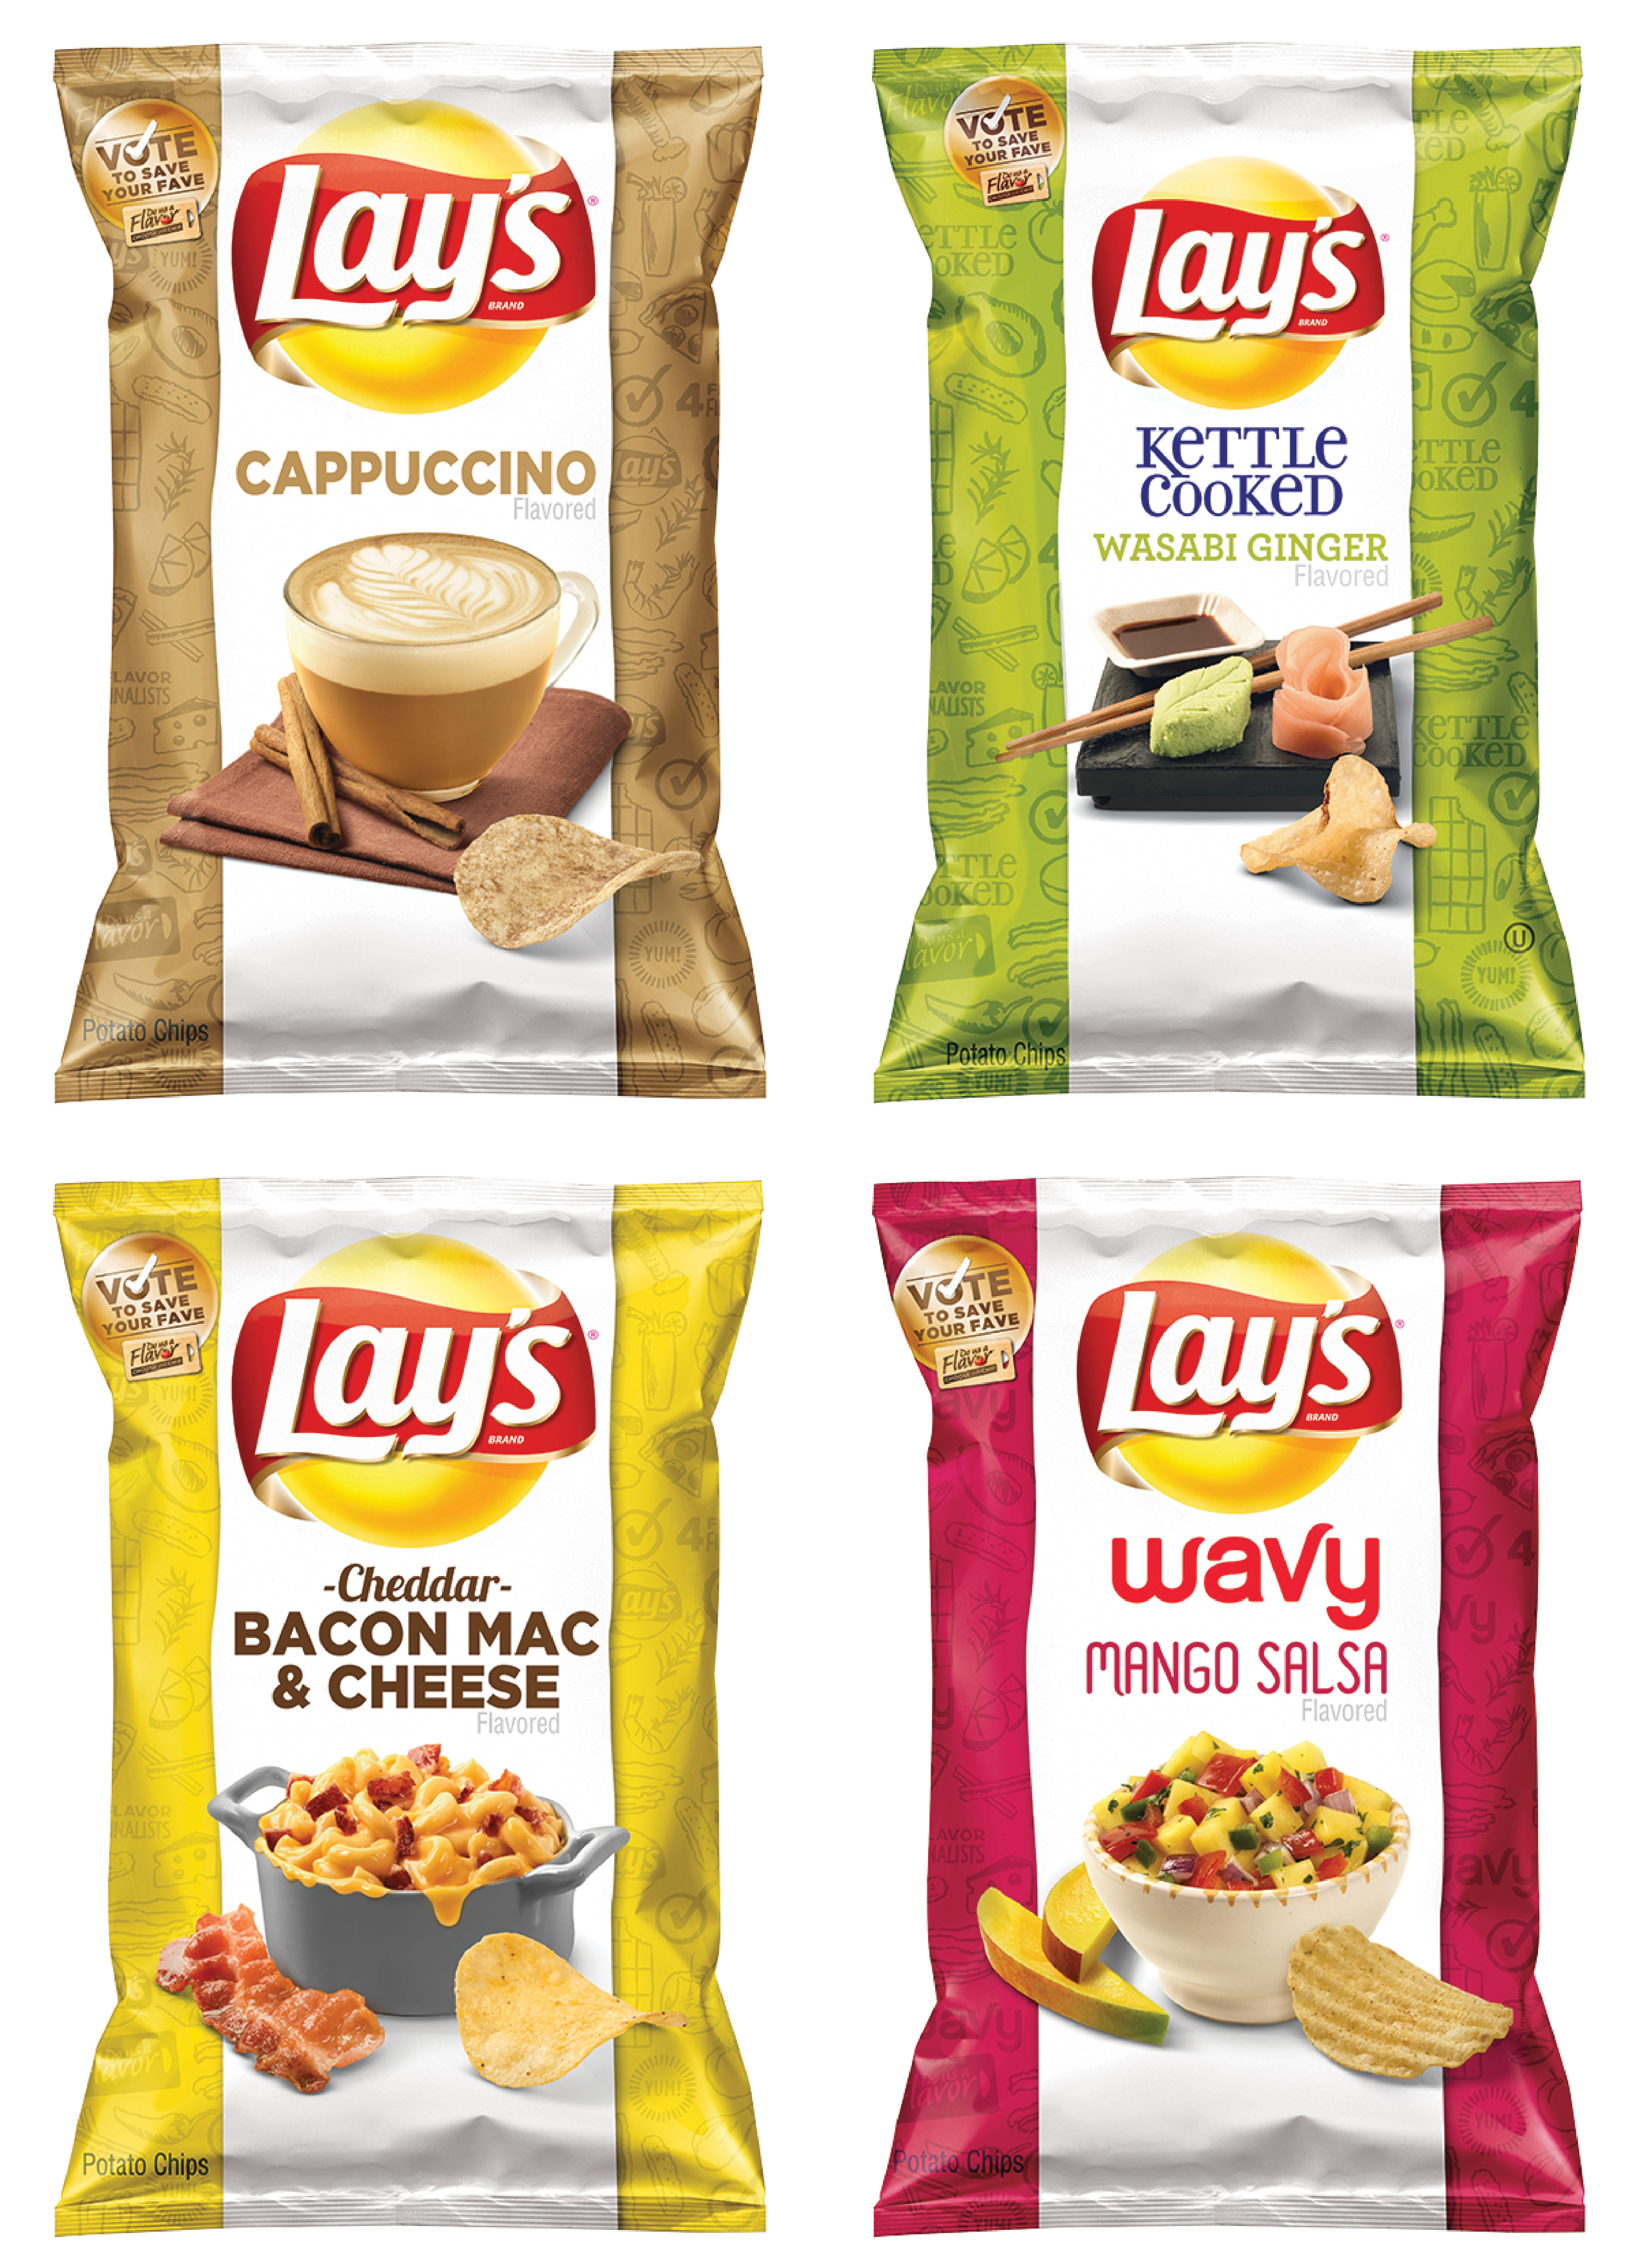 Using images provided by Frito-Lay, this composite image shows the four finalists for its 2014 "Do Us a Flavor" contest in the U.S. (Associated Press)